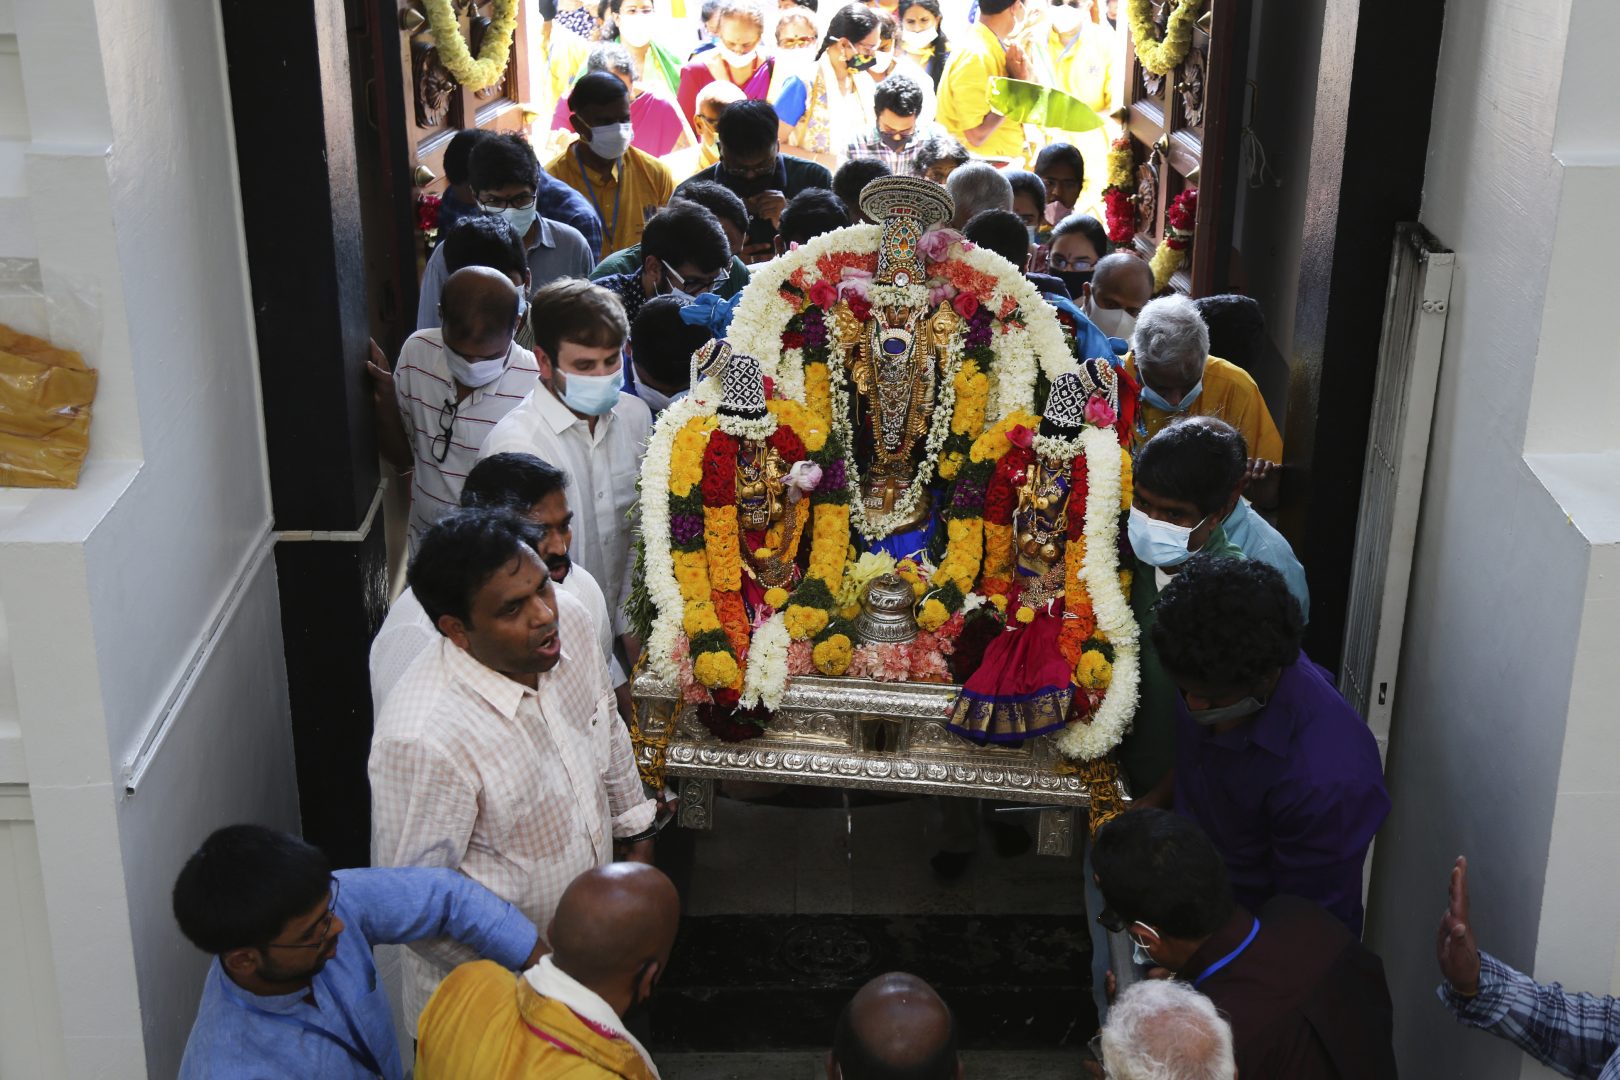 Sri Venkateswara Temple devotees and volunteers carry a deity back into the temple during Maha Kumbhabhishekam, a five-day Hindu rededication ceremony in Penn Hills, Pa., Sunday, June 27, 2021. Built in the 1970s, the Sri Venkateswara Temple is the oldest major Hindu temple in the country. Maha Kumbhabhishekams occur about every 12 years and involve ceremonies to reenergize the temple and its deities.